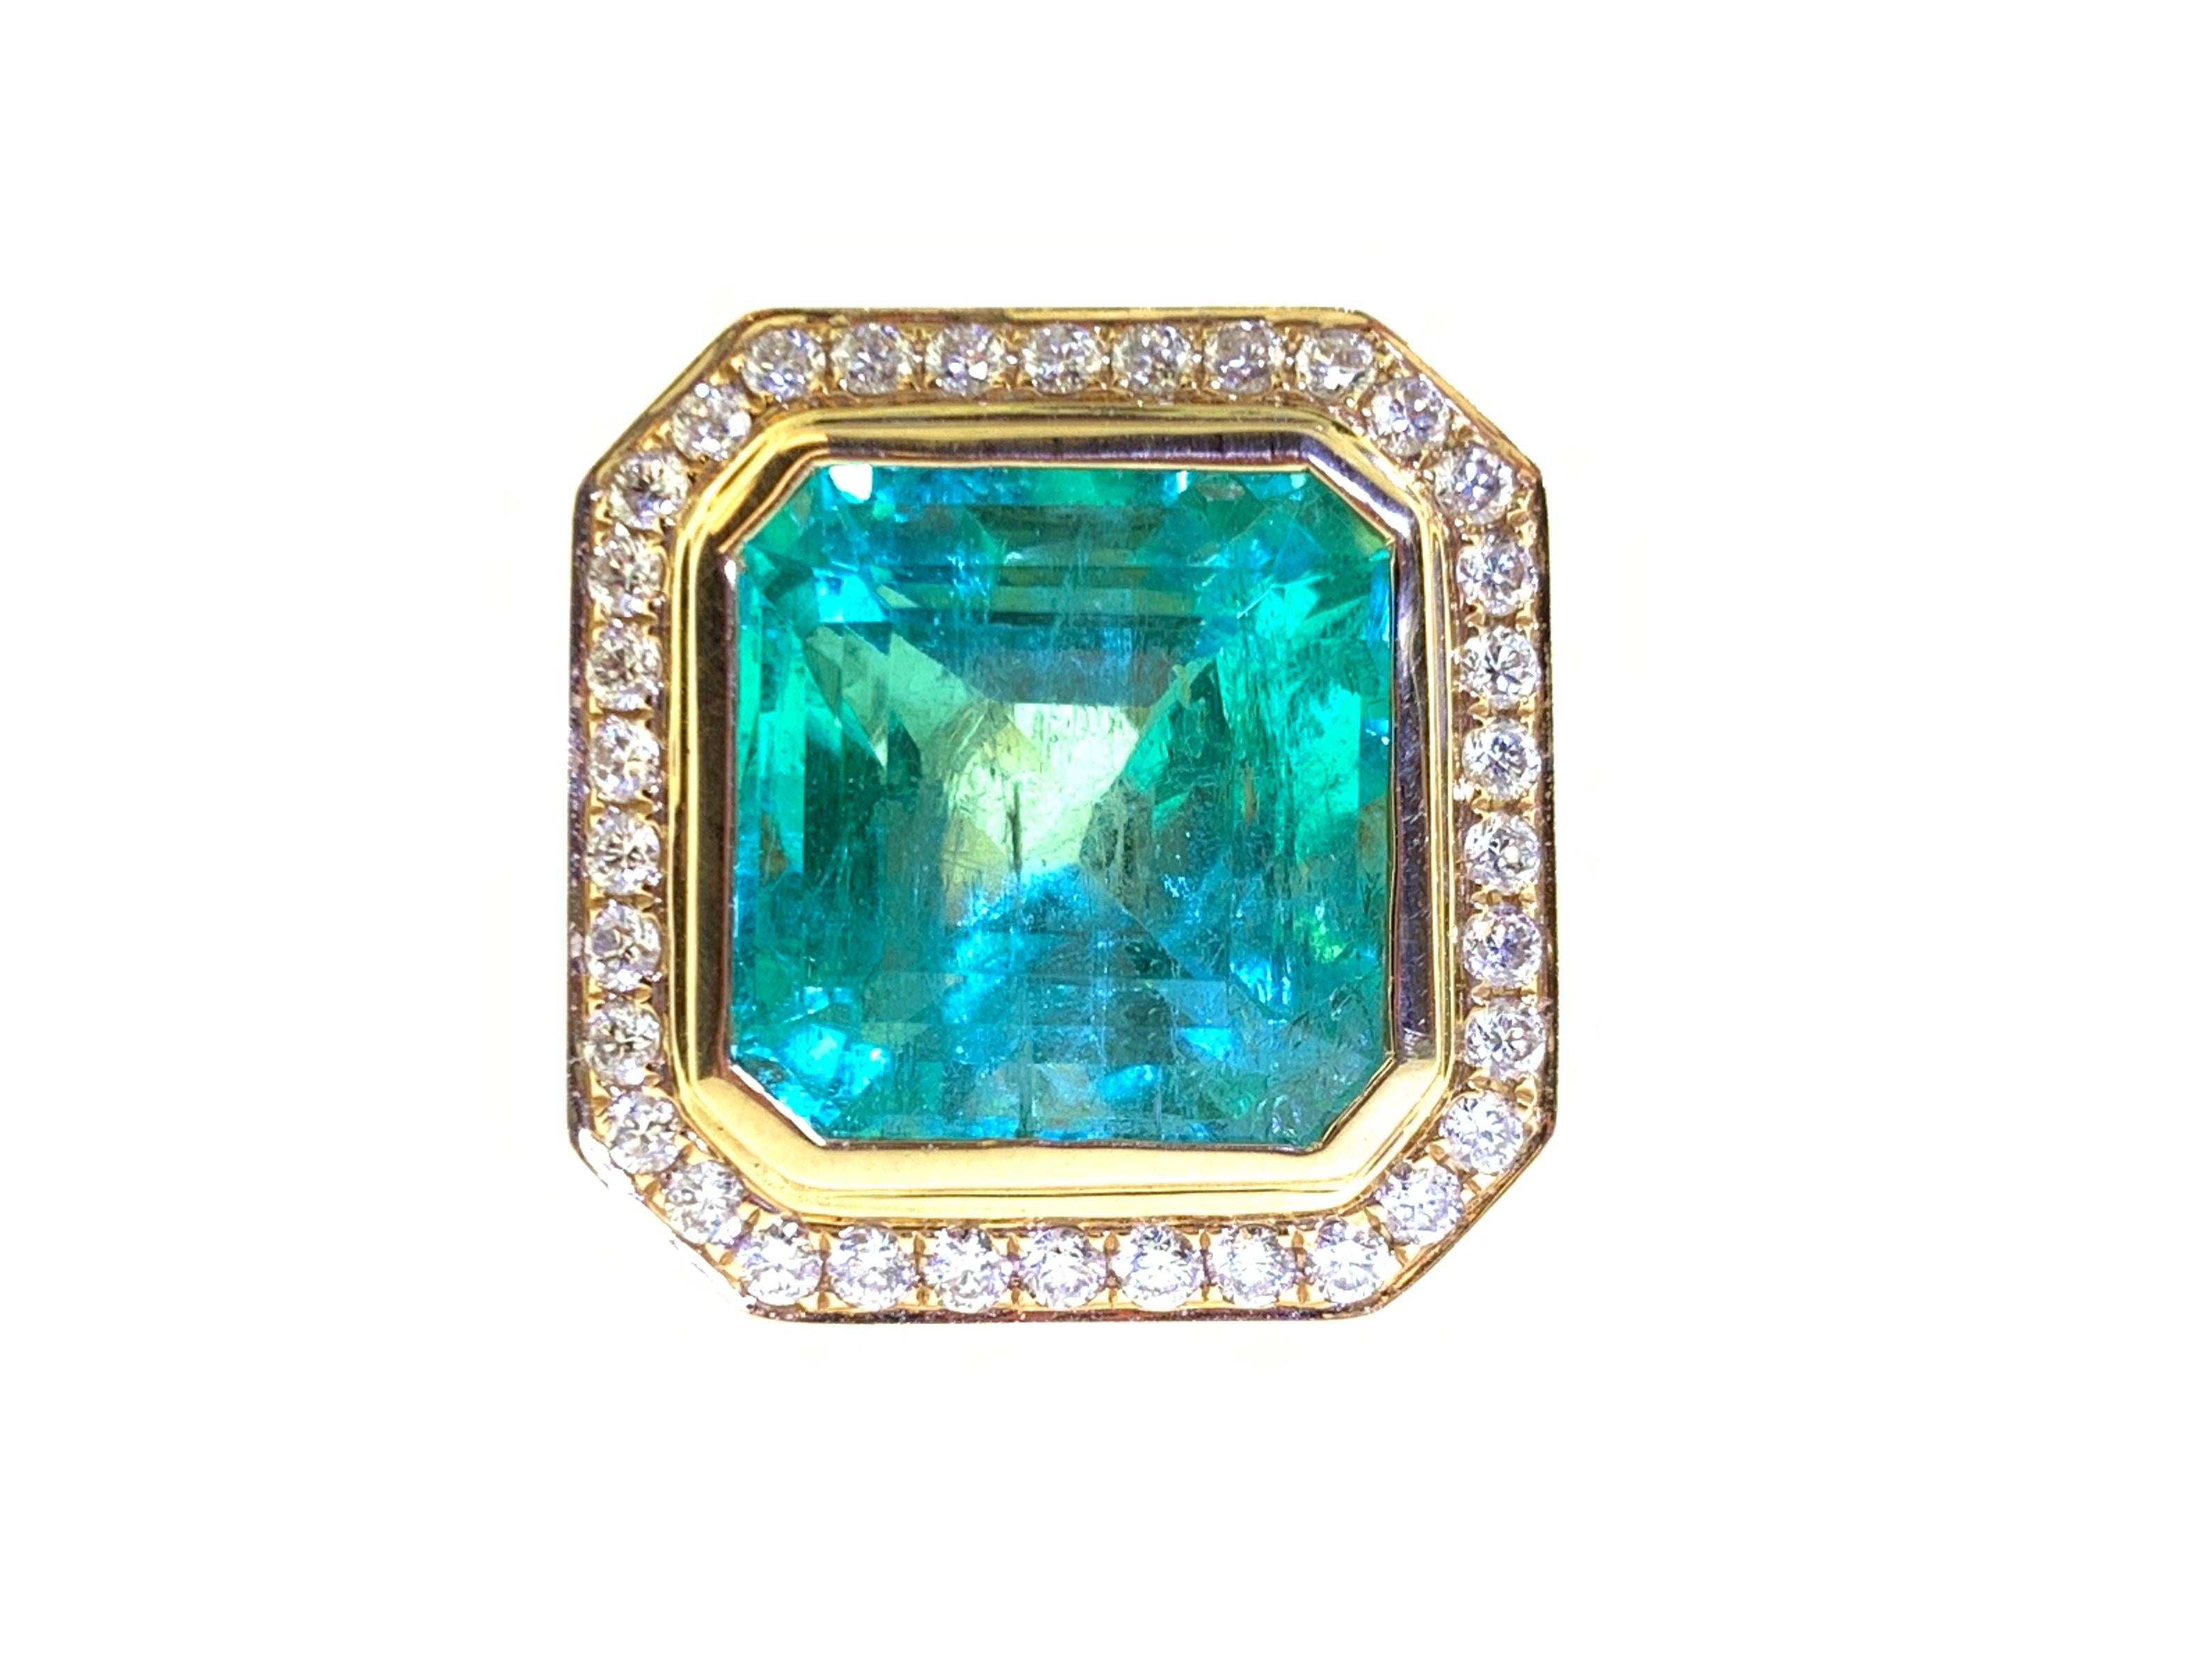 This stunning cocktail ring showcases a GIA Certified 10.51 Carat Emerald Cut Colombian Emerald, with a beautiful diamond halo. This ring is set in 18k yellow gold with the shank adorned with 3 flush sets of white baguette diamonds on each side.